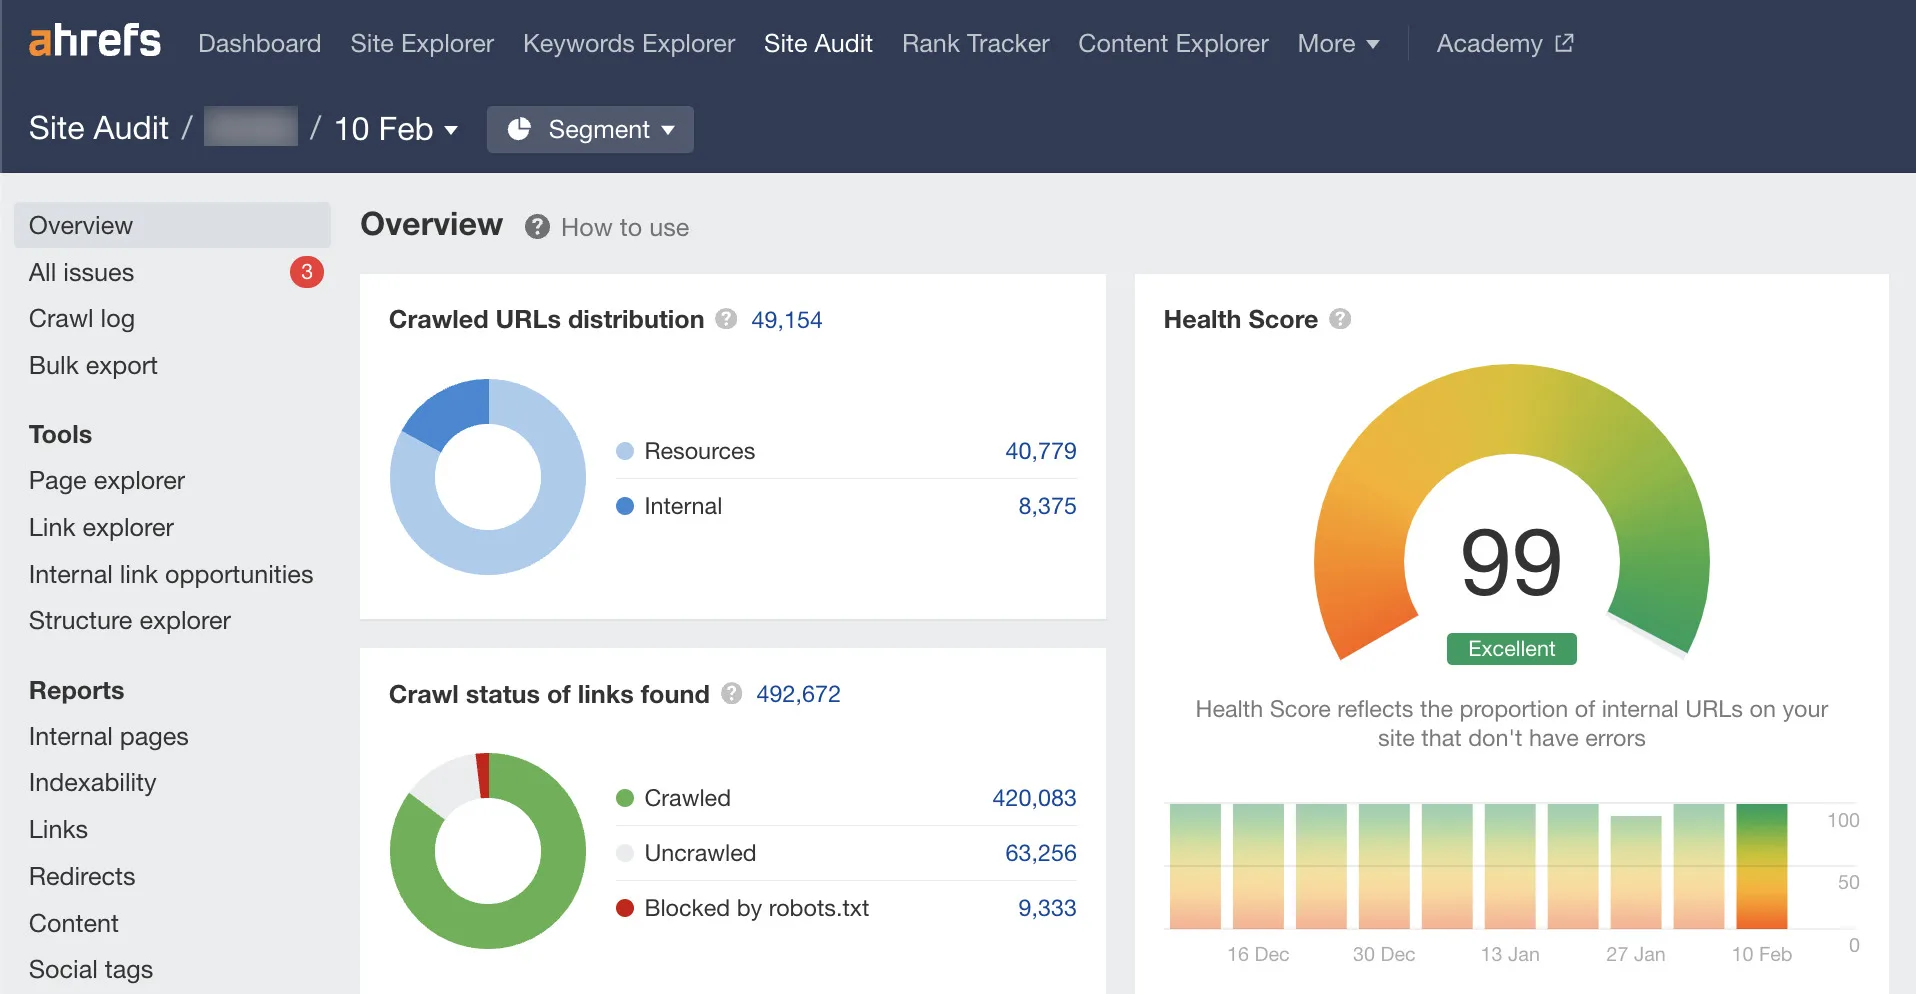 Ahrefs' Site Audit homepage